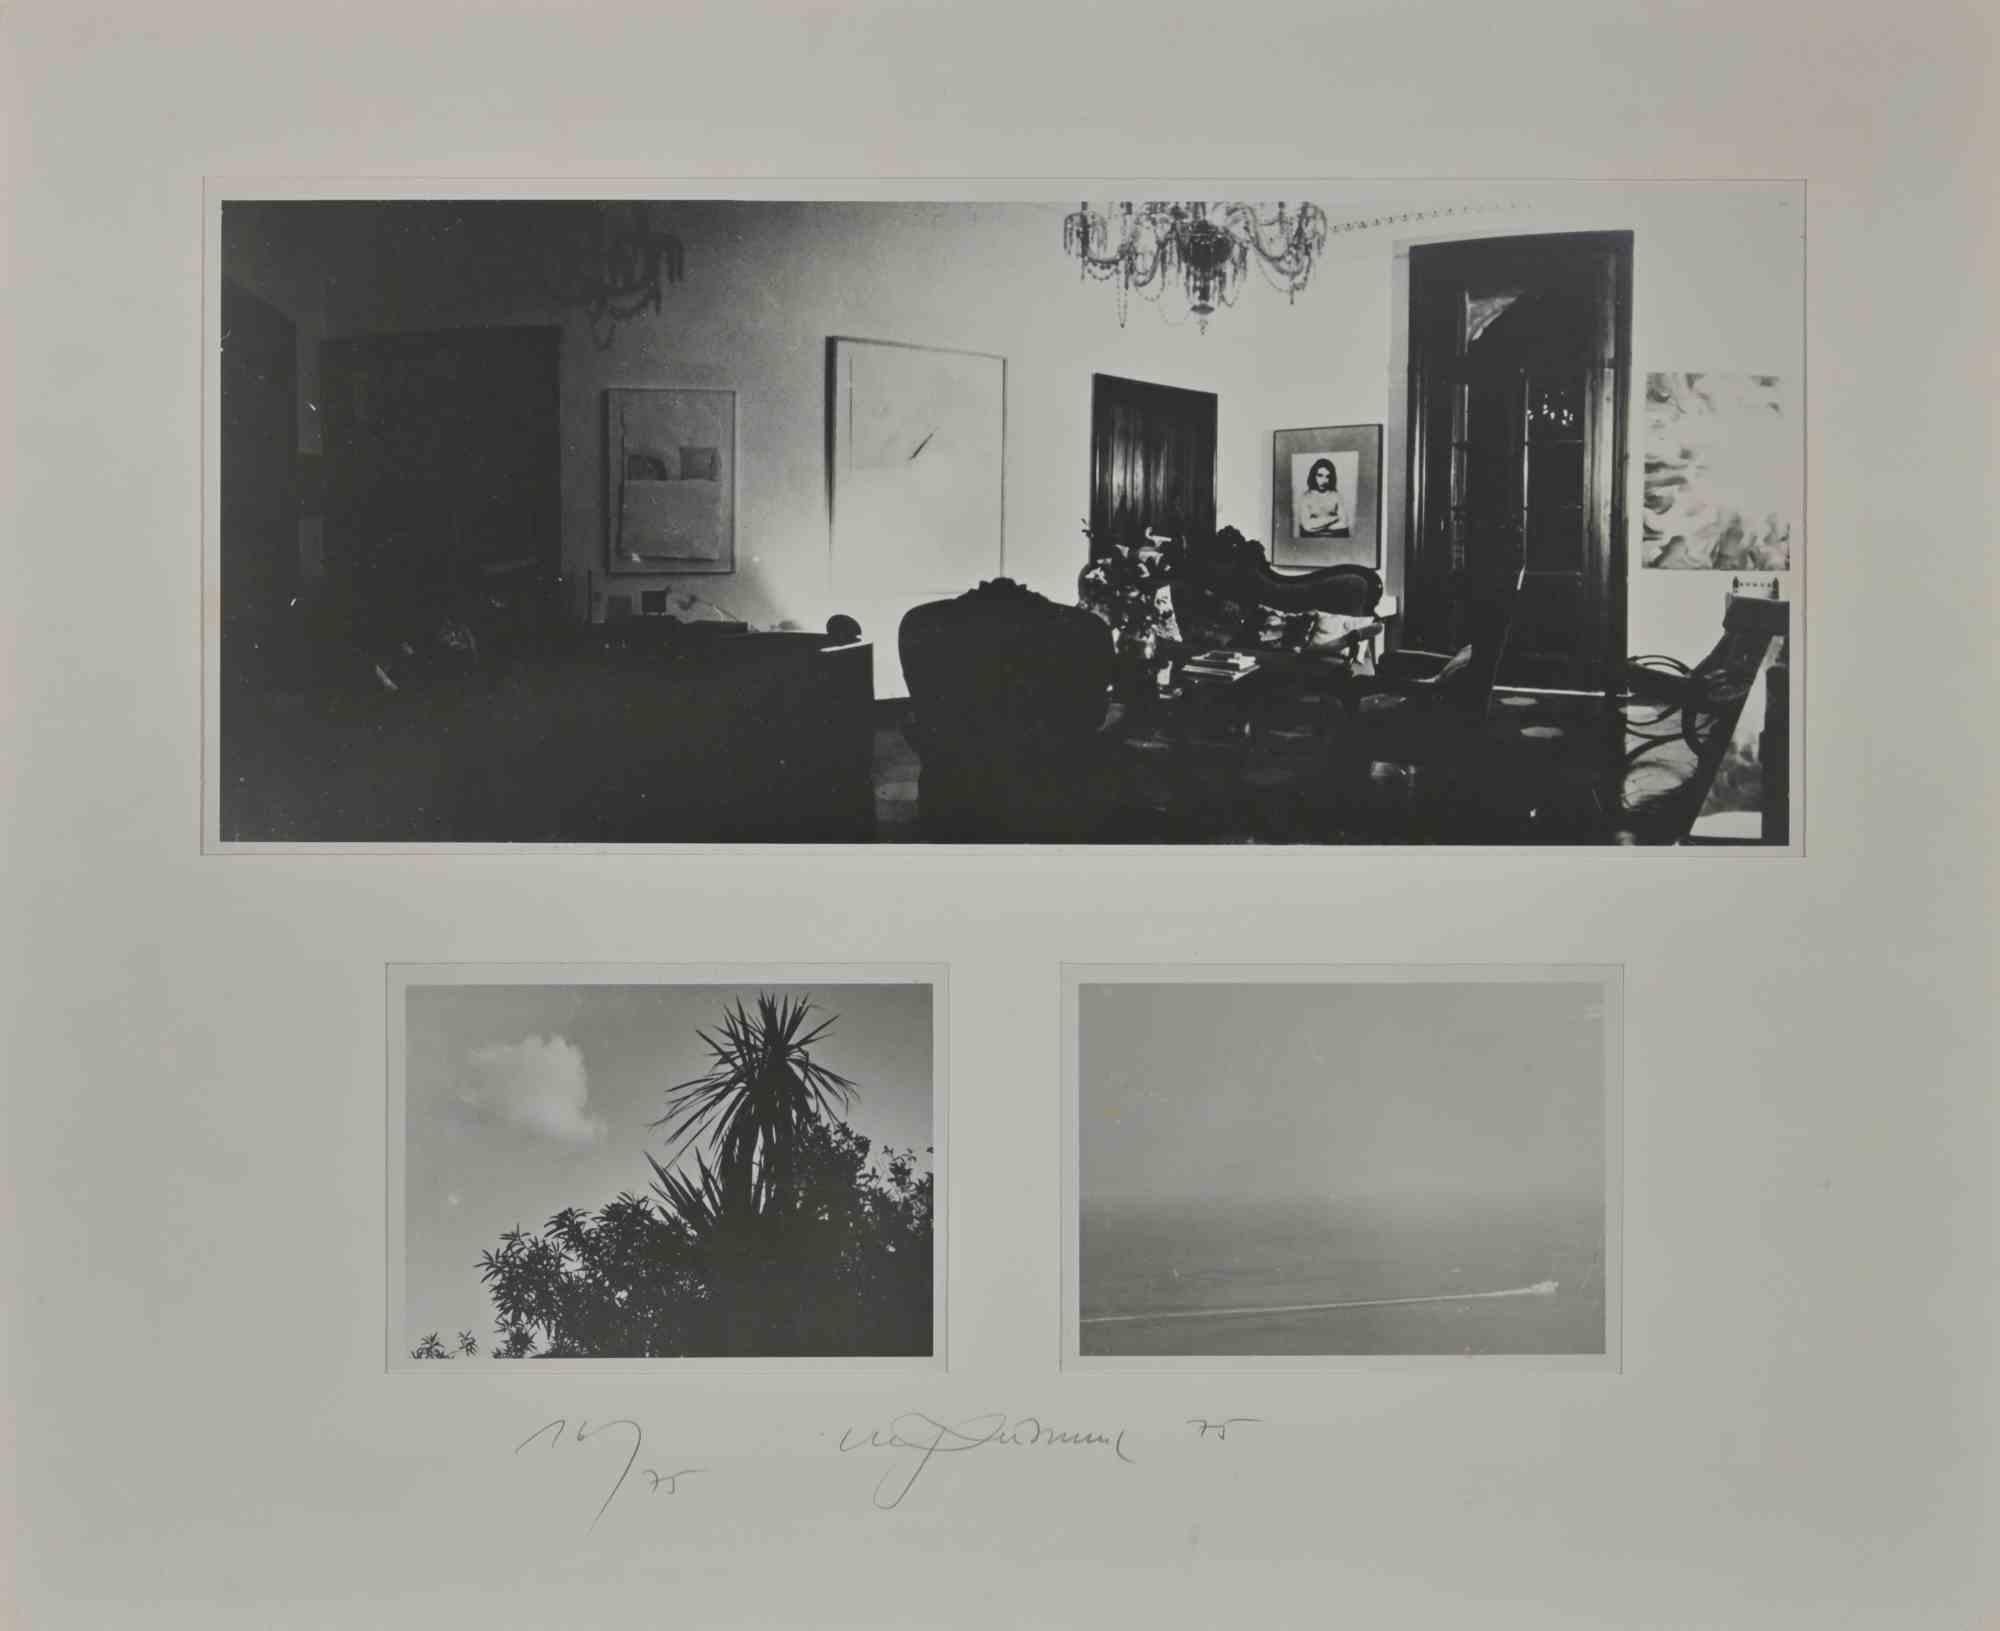 Urs Lüthi Figurative Photograph - An Island in the Air - Photograph by Urs Luthi - 1975